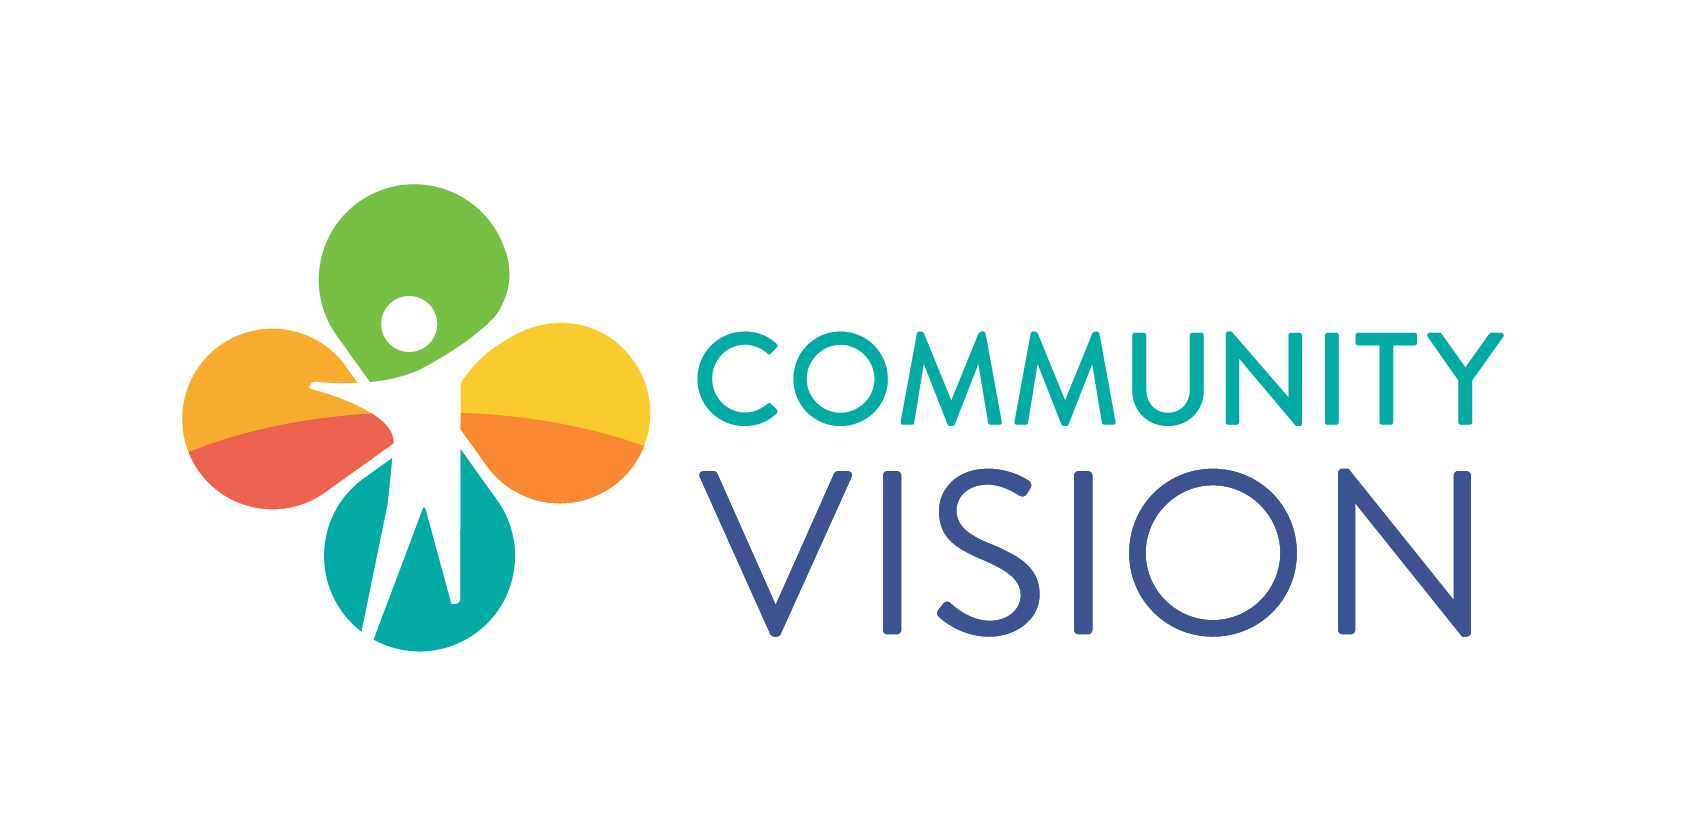 Community Vision's logo with a white background - On the left, a human figure in white with four petals of color (orange & red, green, yellow & orange, and aqua) framing the figure. To the right, the word community in aqua above the word vision in dark blue.